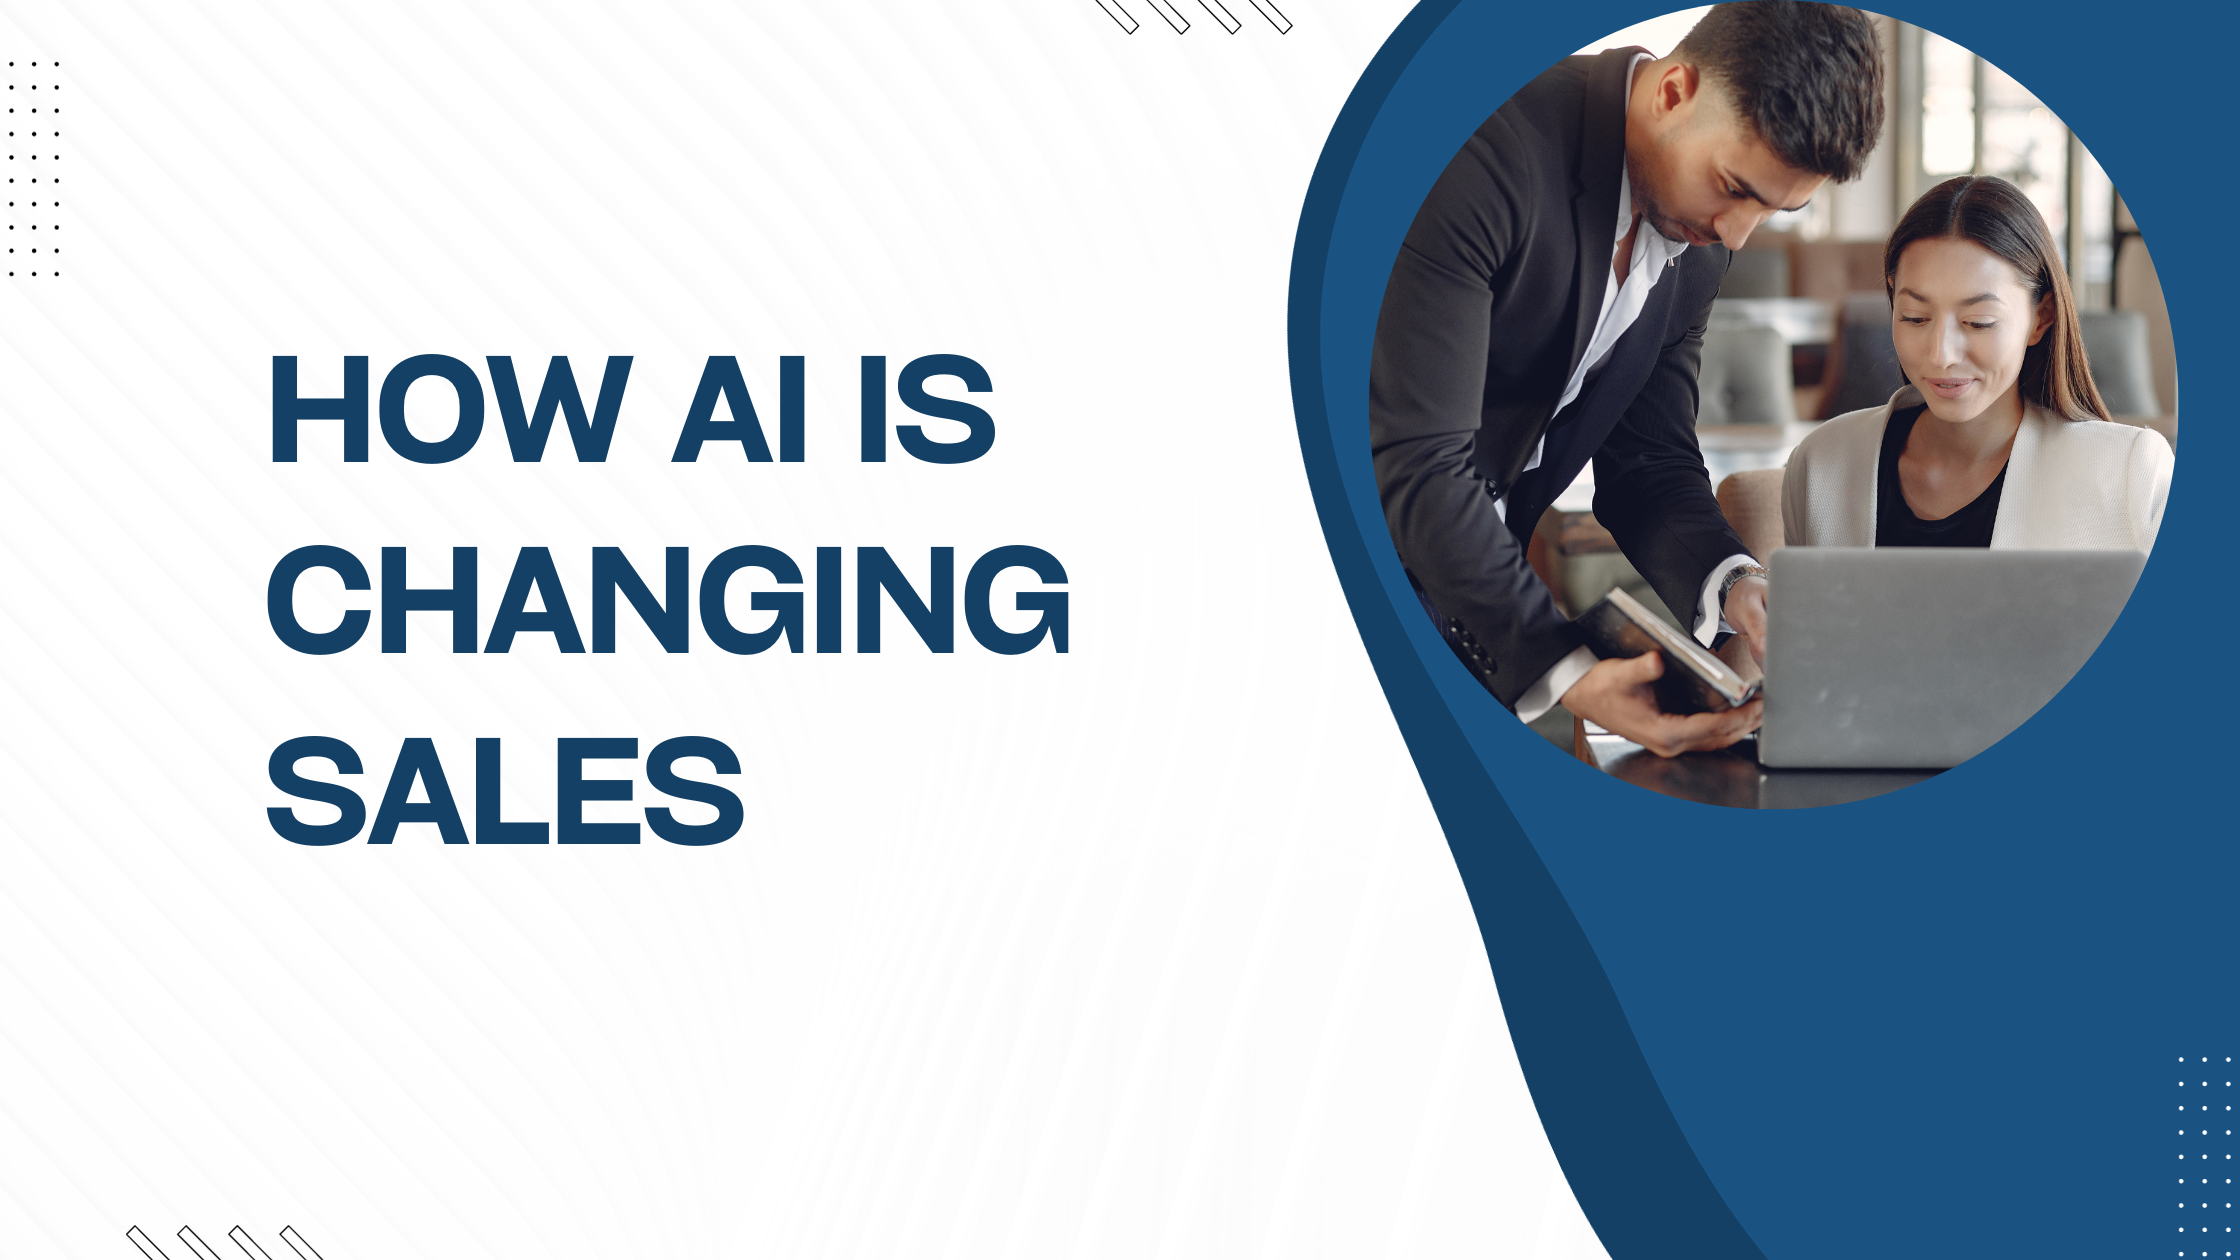 How AI is changing sales